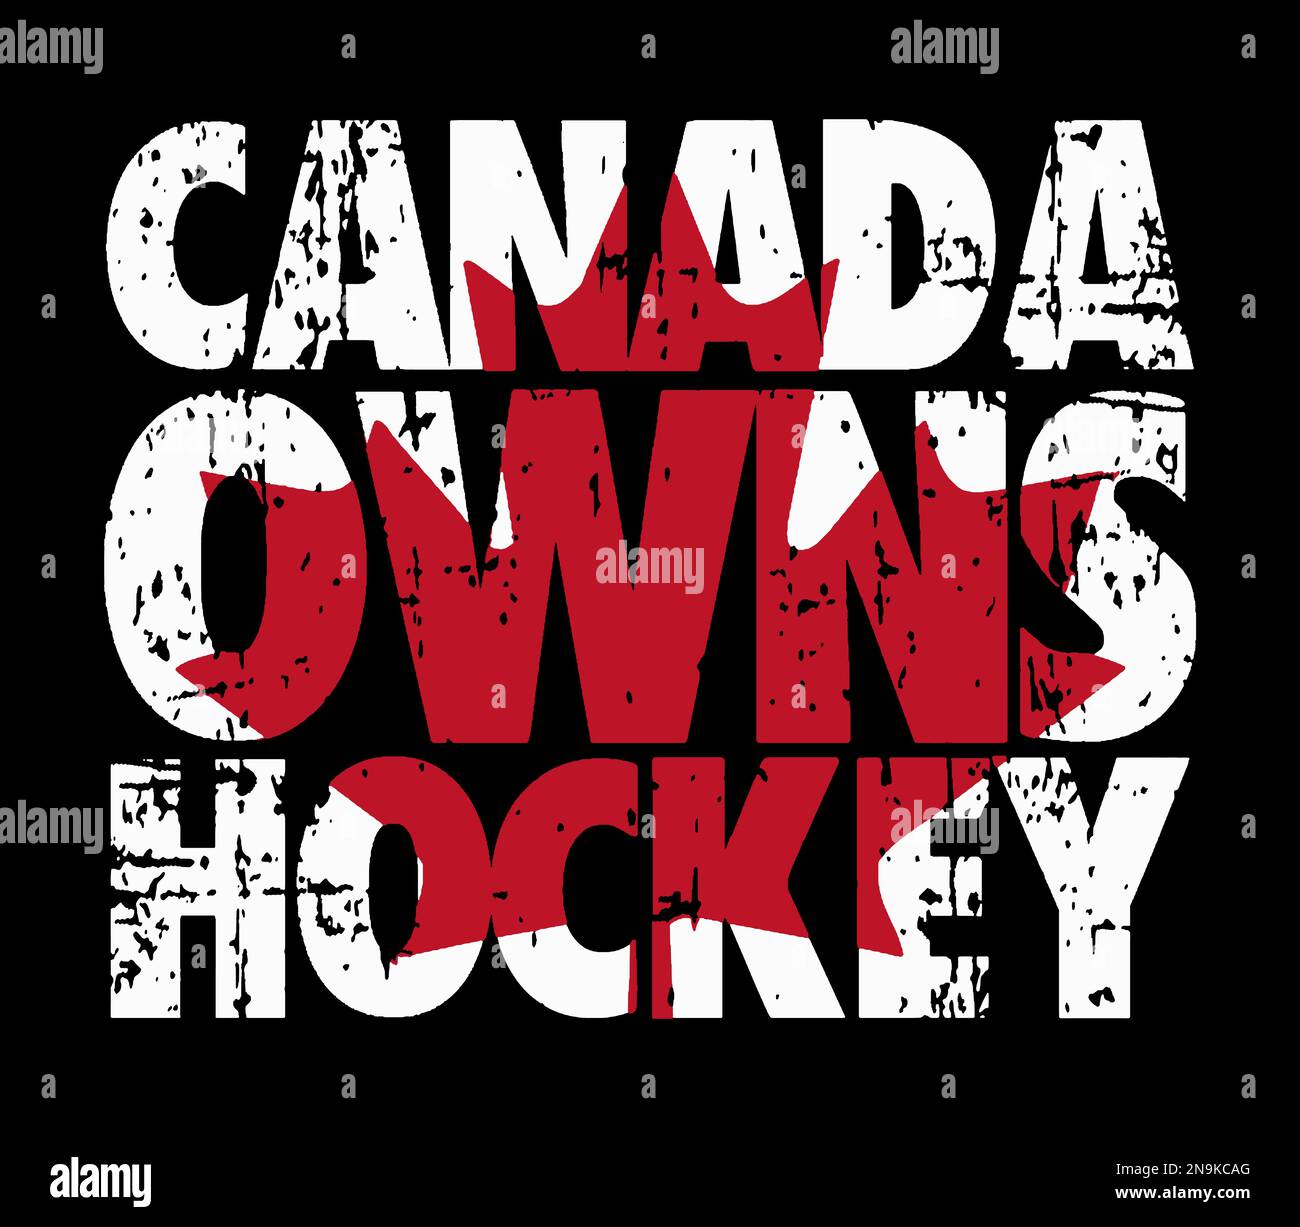 Canada owns hockey. Grungy hockey quote design with maple leaf. Stock Vector